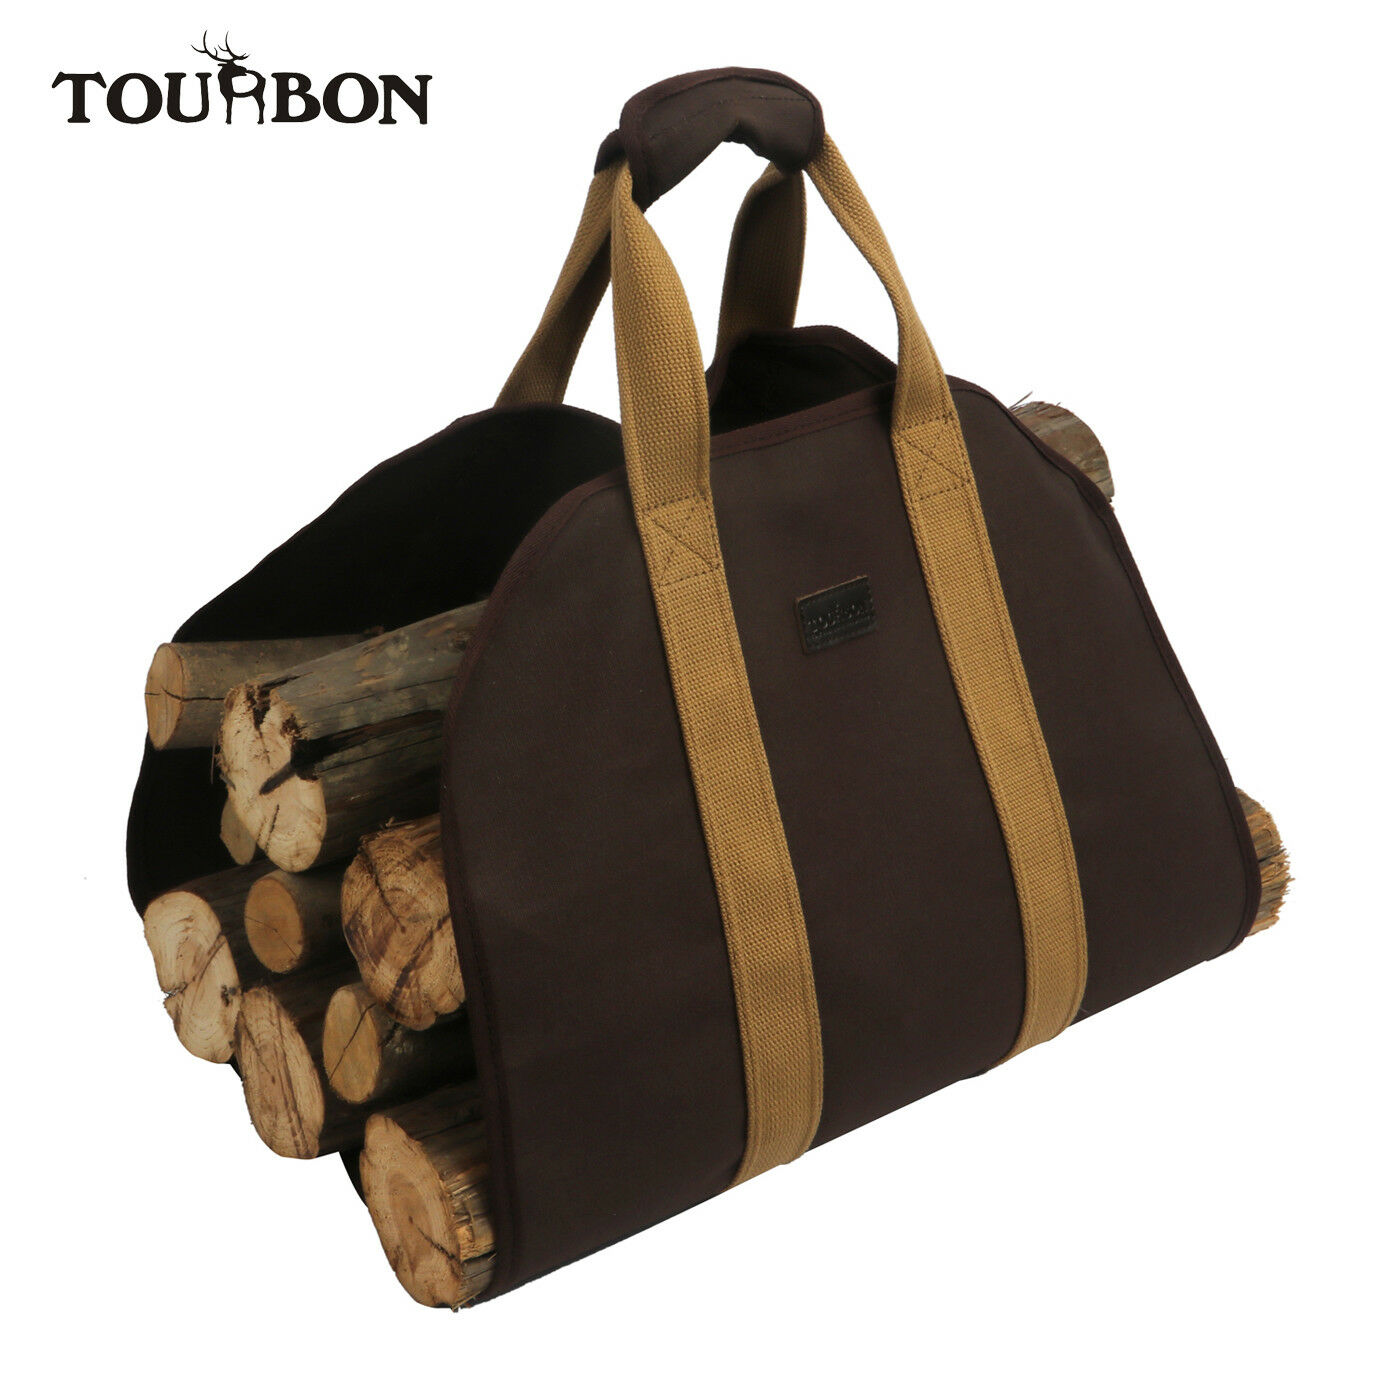 Tourbon 12oz Canvas Wood Carry Bag Firewood Log Carrier Tote Bag Outdoor Camping